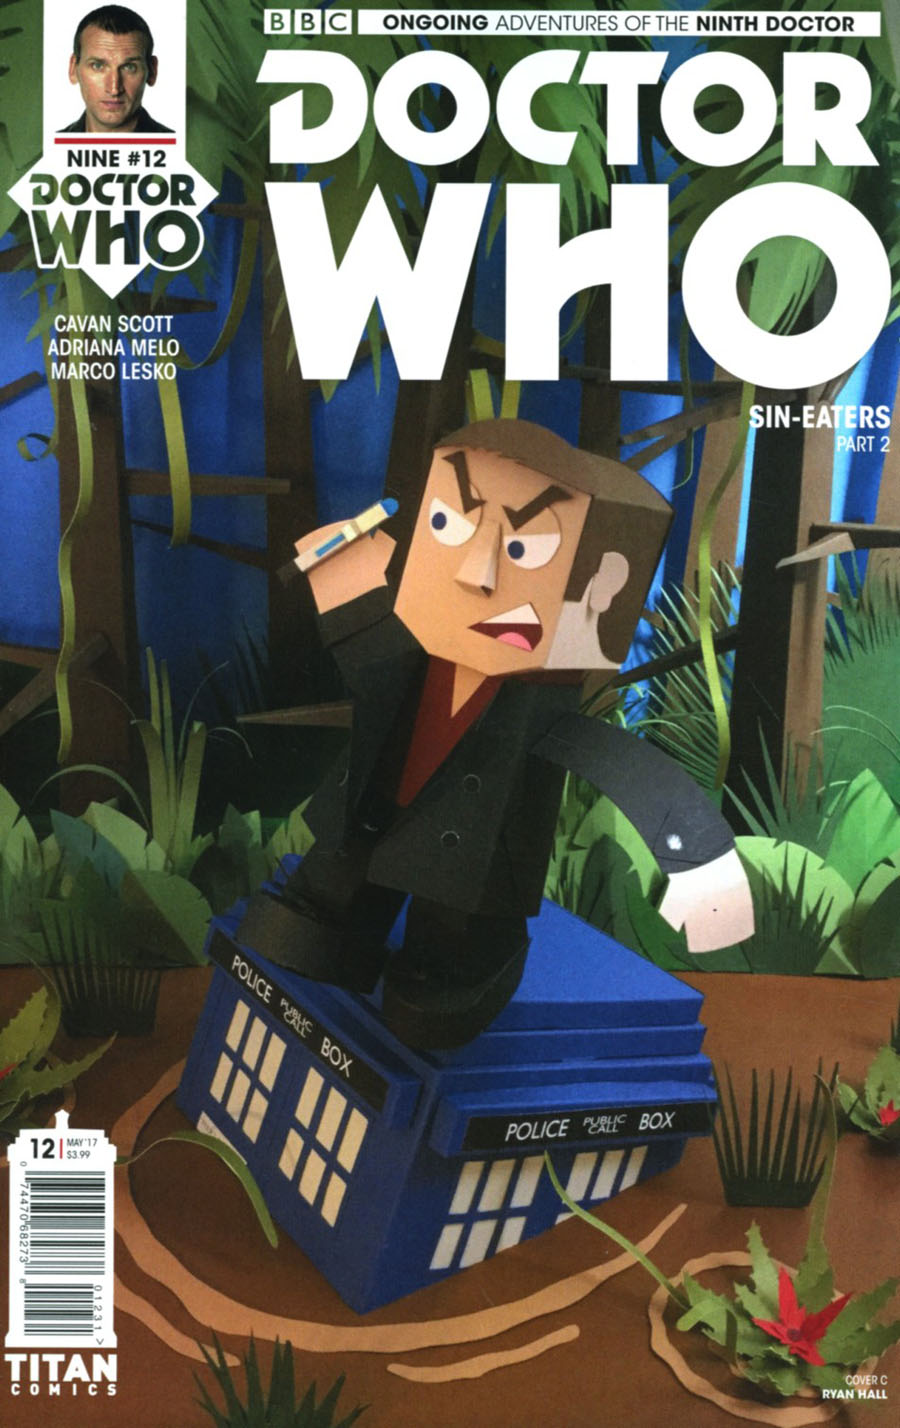 Doctor Who 9th Doctor Vol 2 #12 Cover C Variant Papercraft Cover